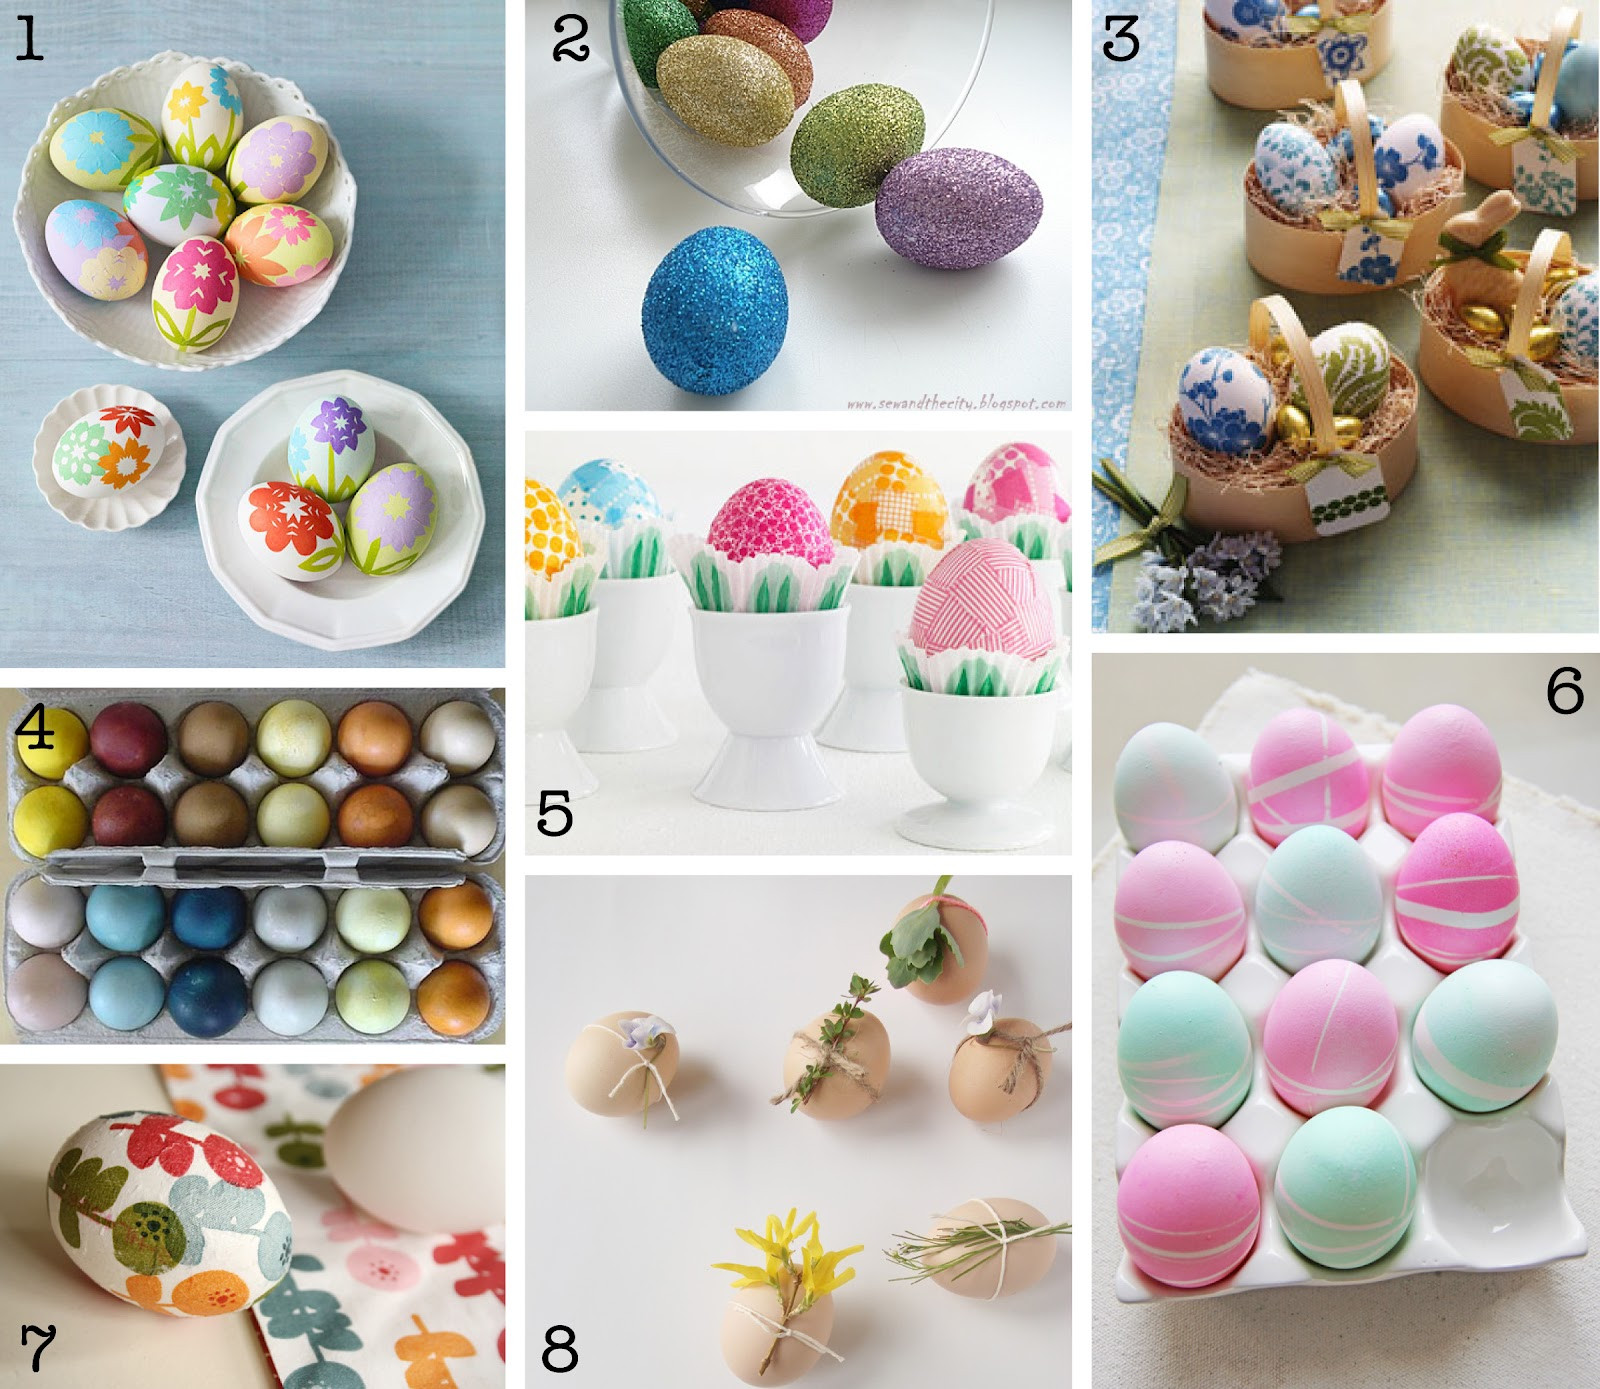 DIY Easter Decorations
 The Creative Place DIY Easter Egg Decorating Roundup